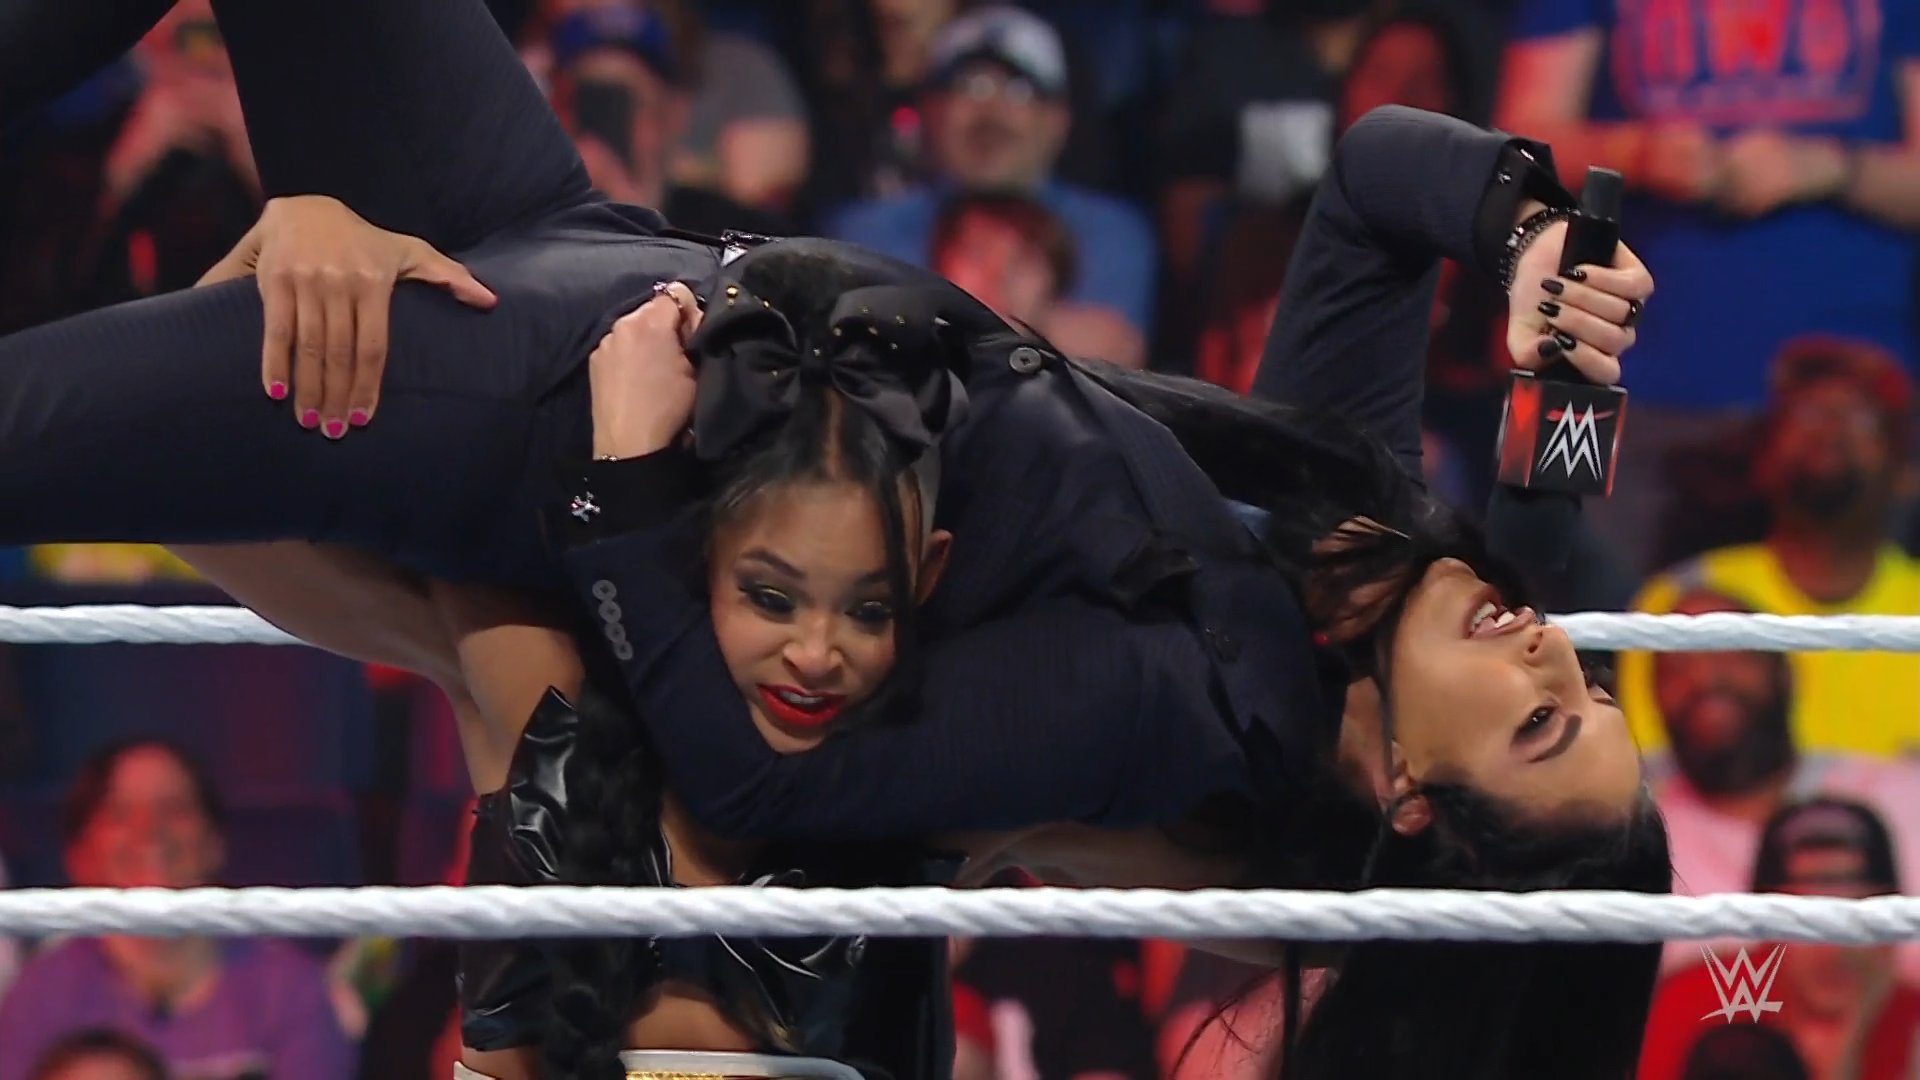 Will Bianca Belair's attack on Sonya Deville have consequences?